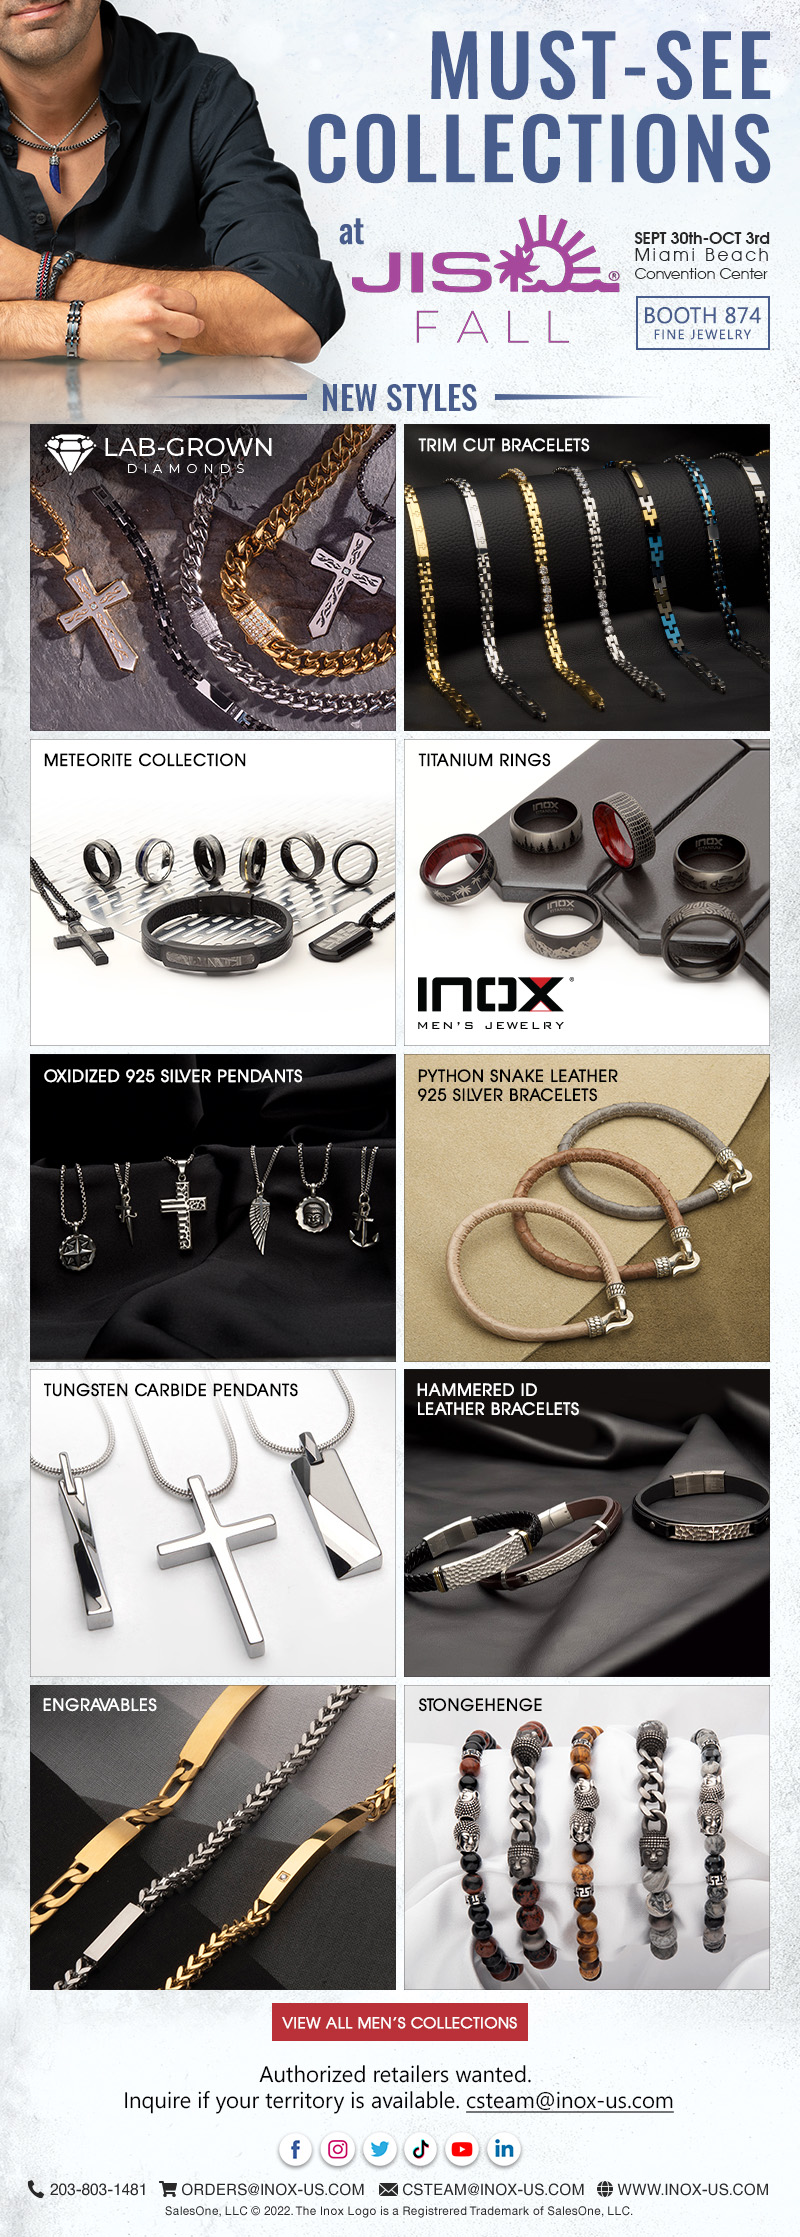 Must-See INOX Collections at JIS Fall Show Booth 874.